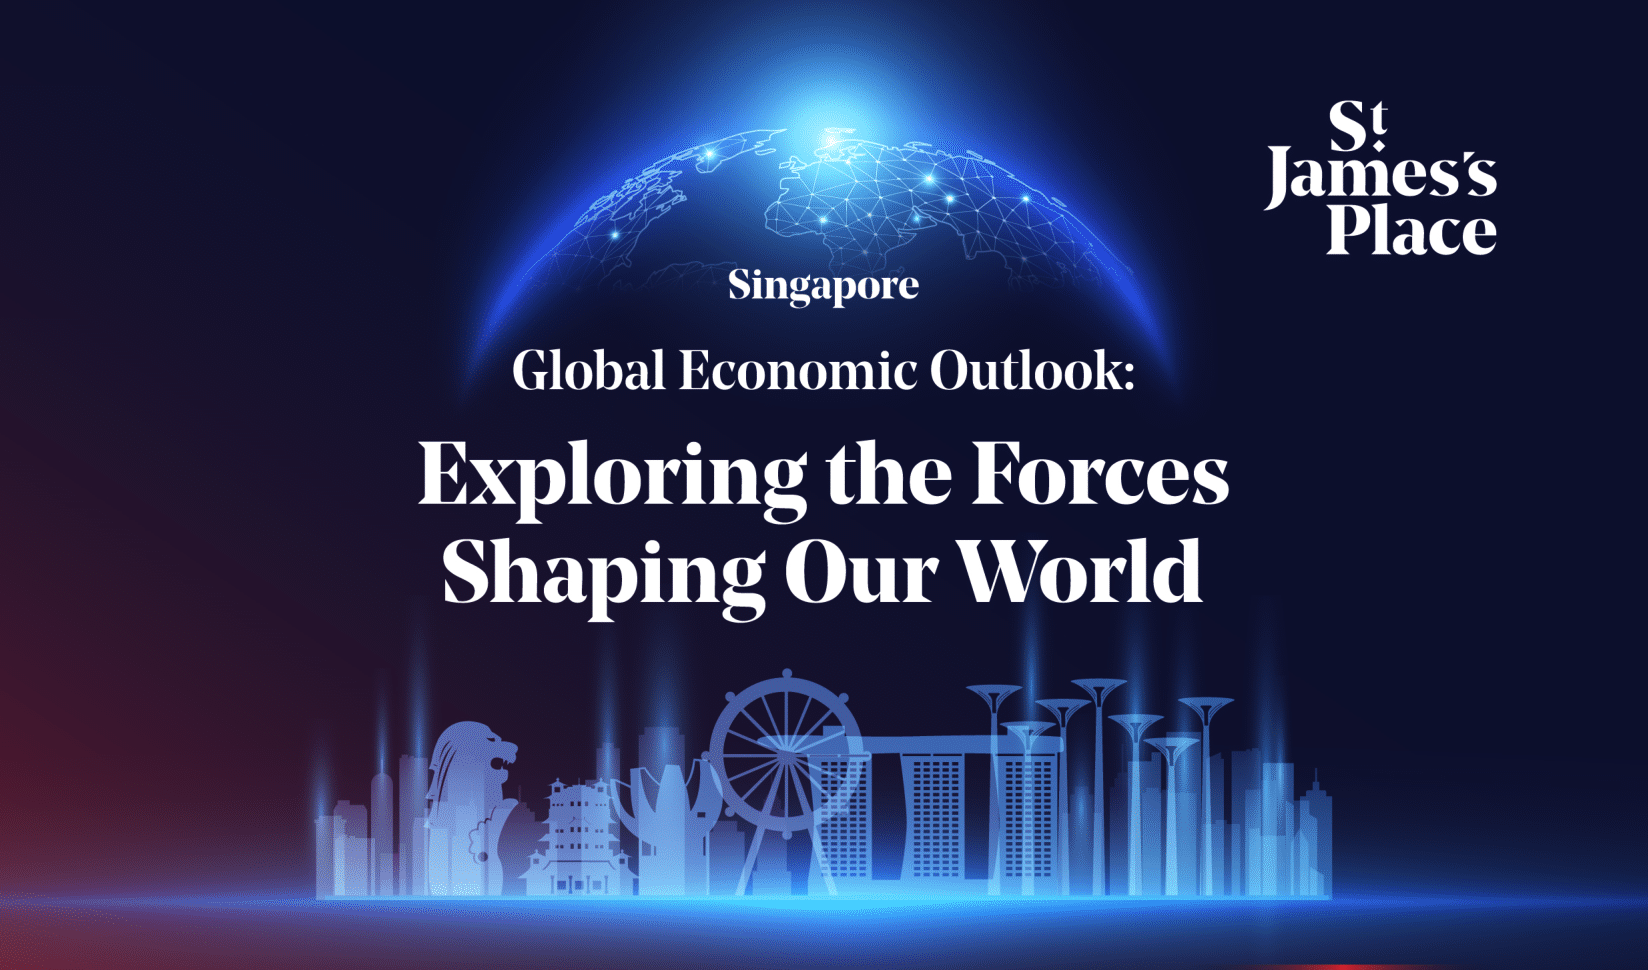 Global Economic Outlook: Exploring the Forces Shaping Our World